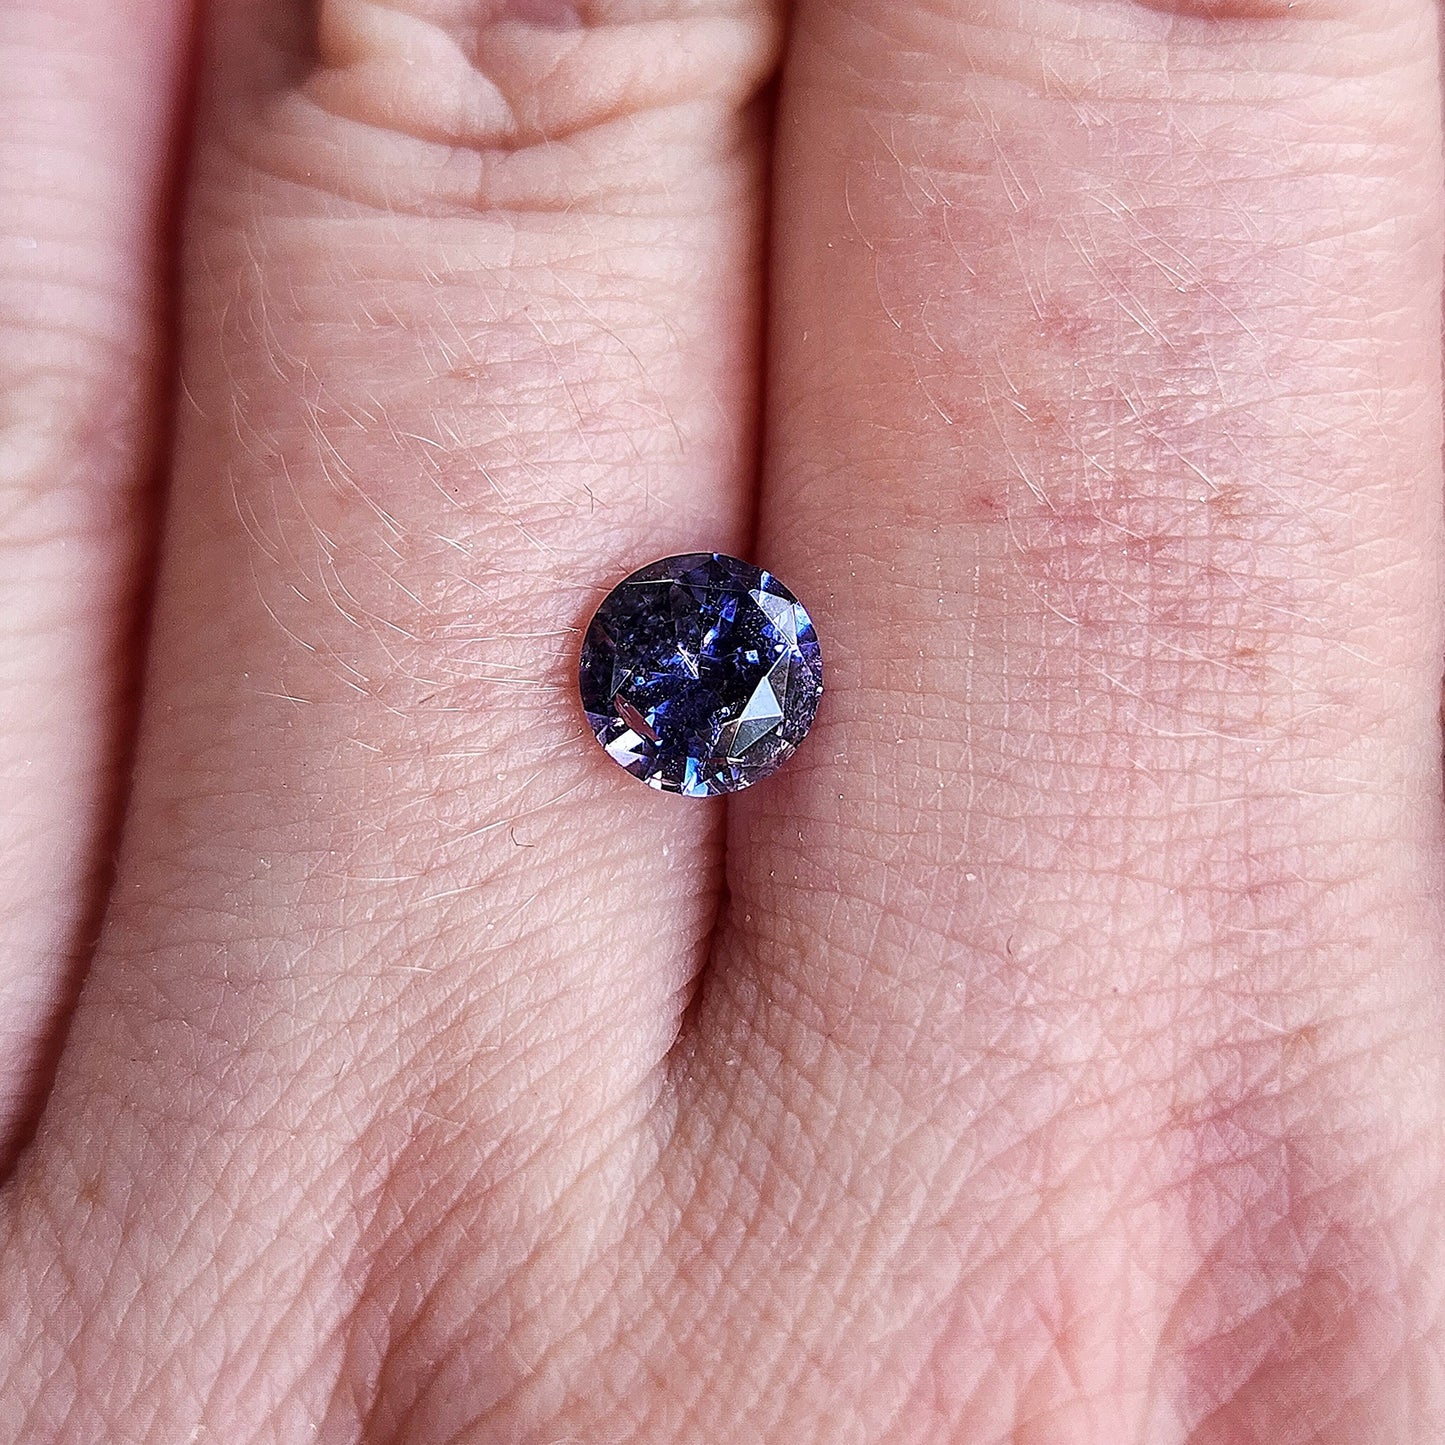 Load image into Gallery viewer, 1.05ct Unheated Umba Sapphire - Color Shift From Blue to Purple
